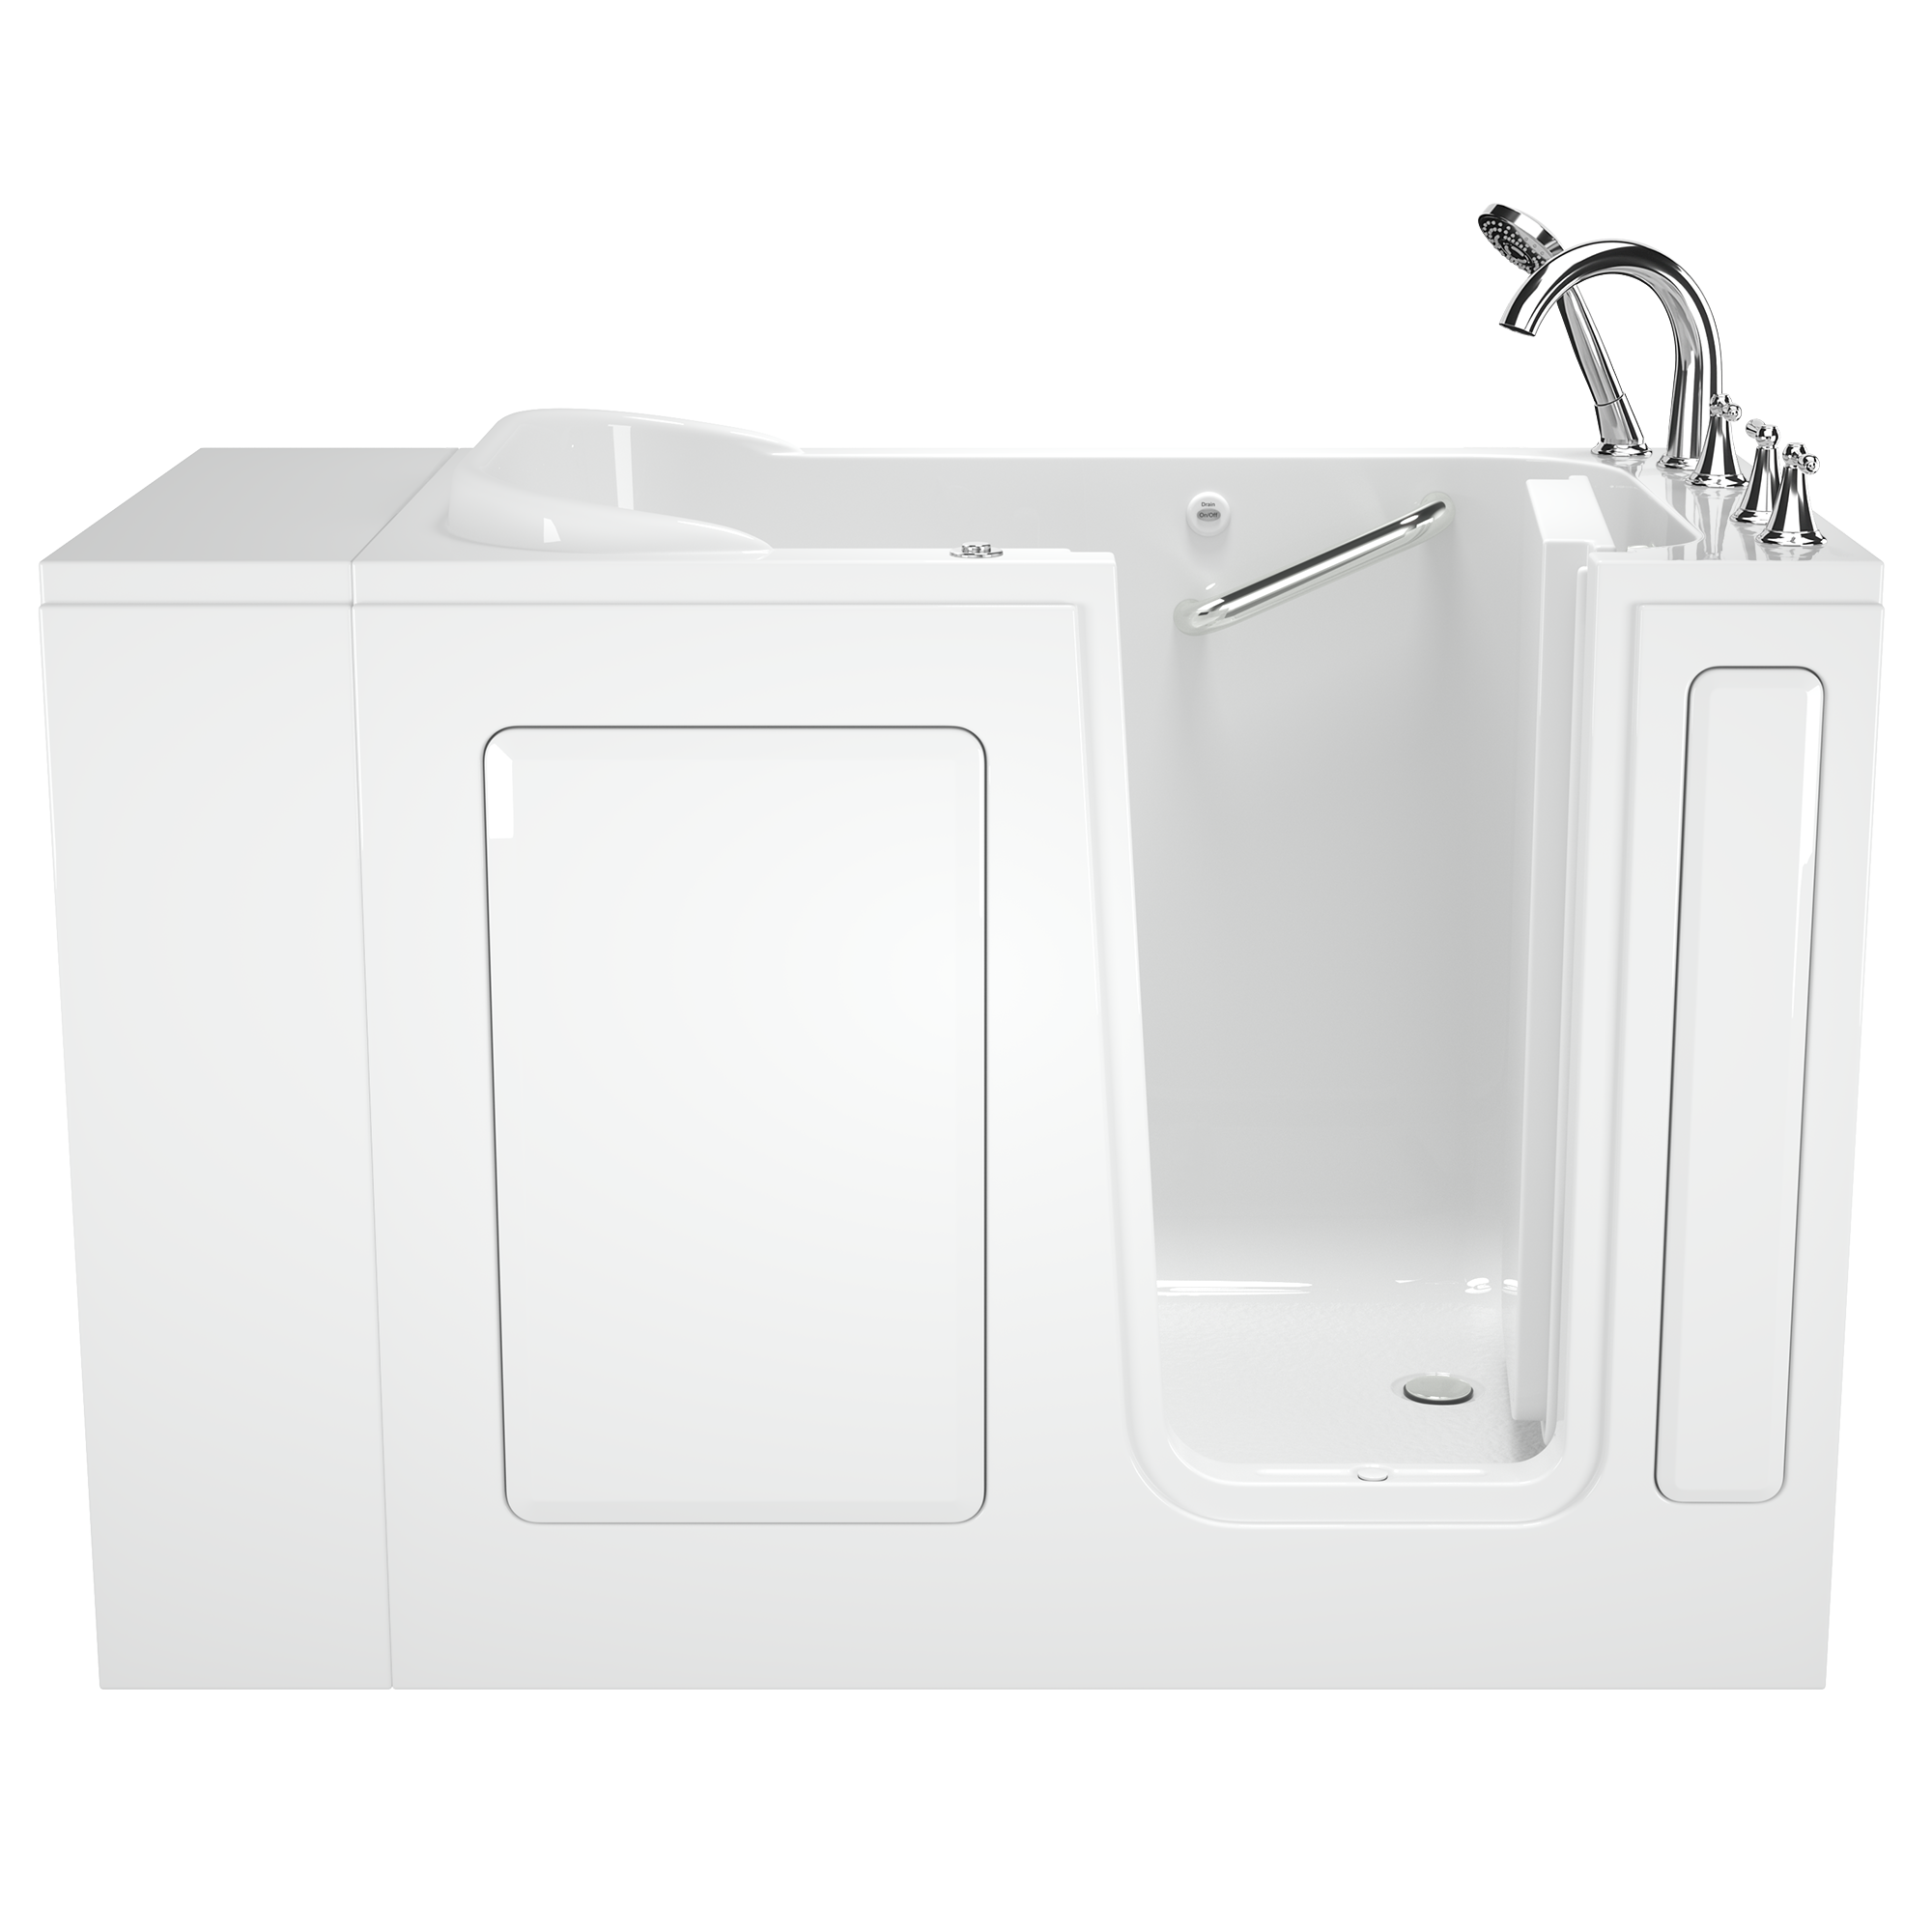 Gelcoat Value Series 28x48-inch Walk-in Bathtub with Whirlpool System  Right Hand Door and Drain